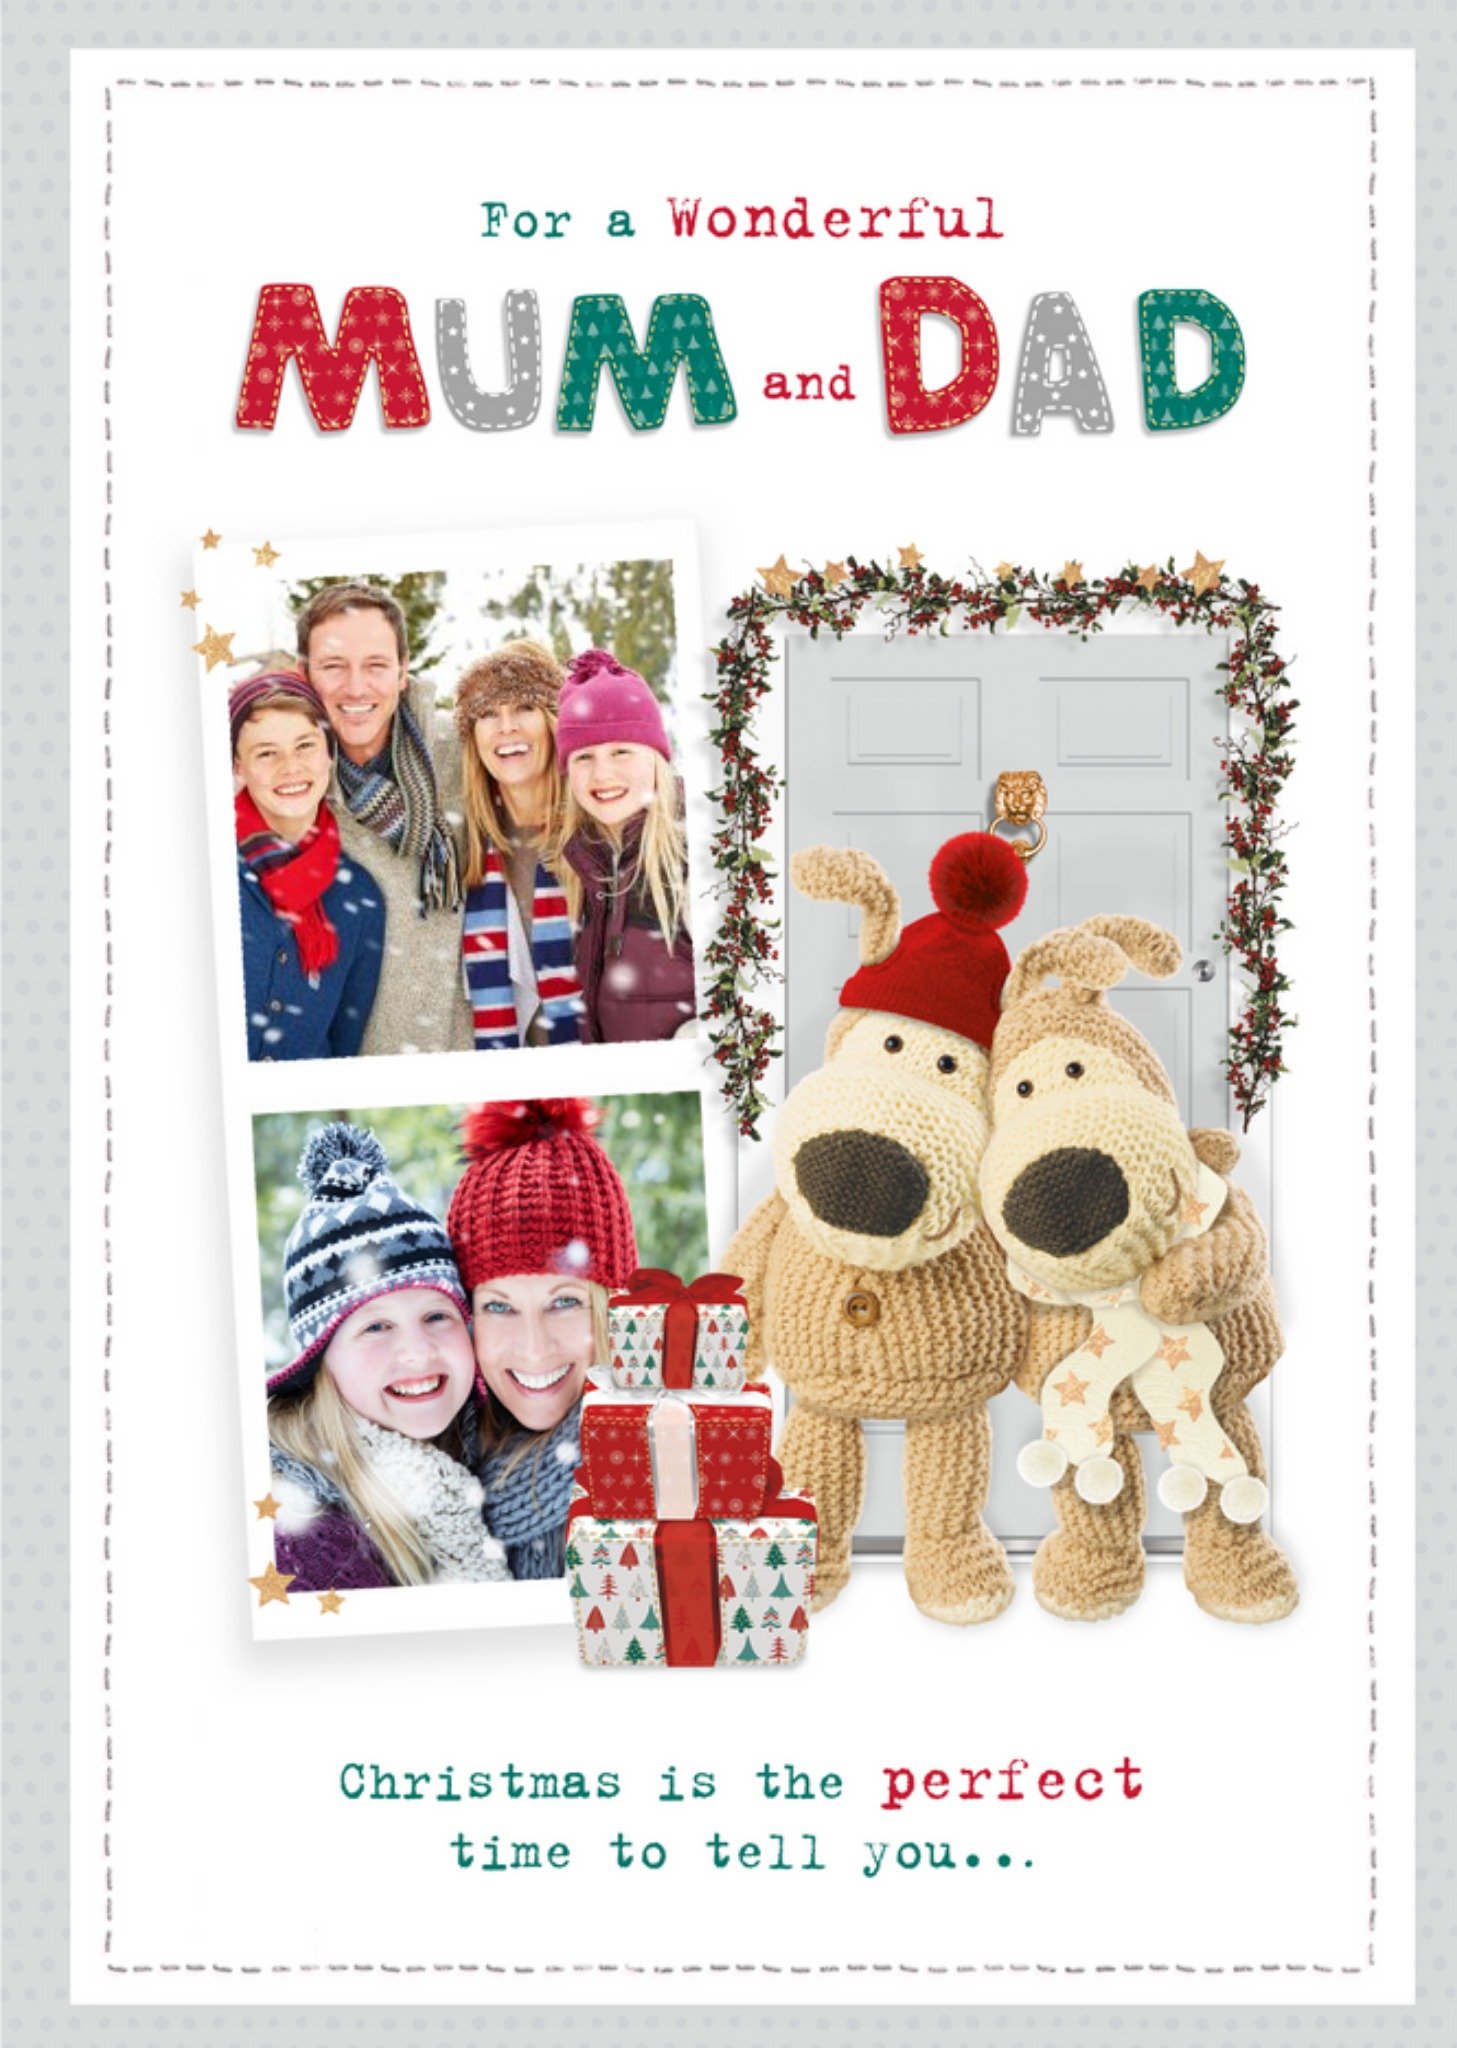 Boofle Christmas Photo Upload Card For A Wonderful Mum And Dad, Large